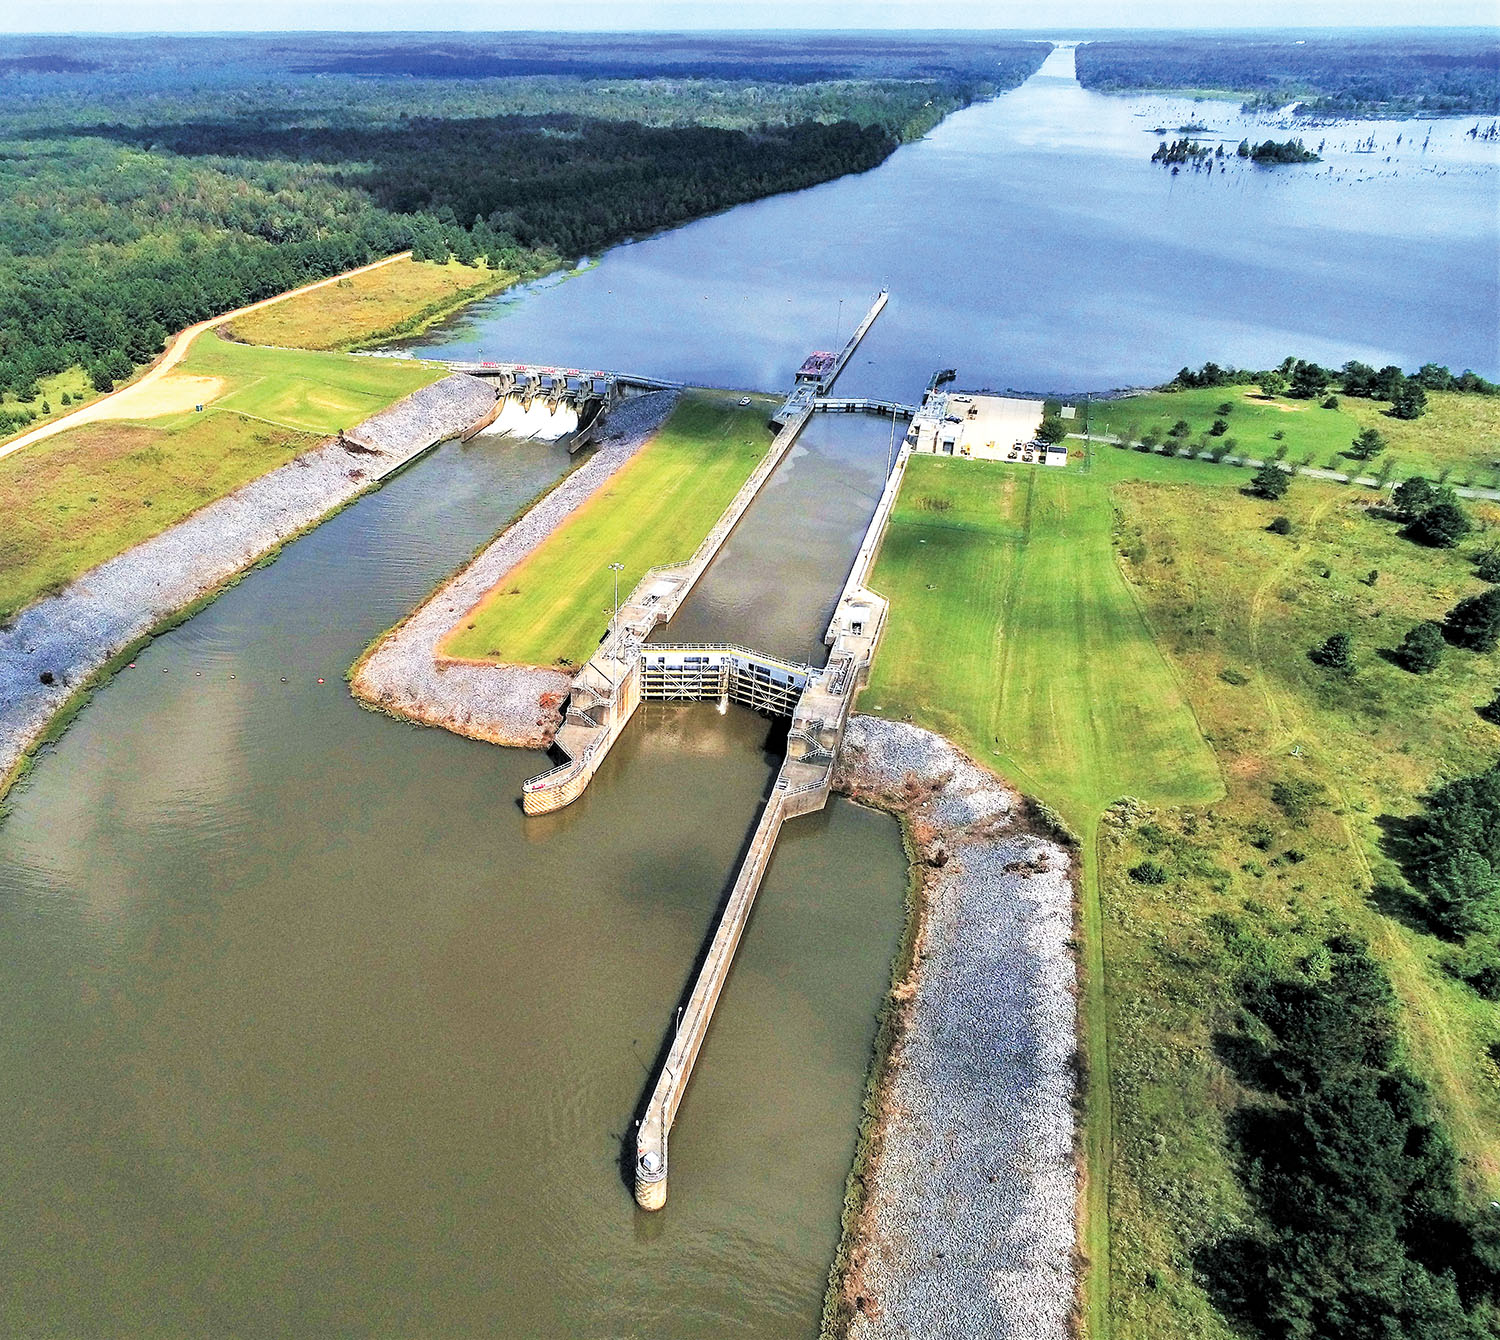 The newly named Thad Cochran Lock & Dam on the Tennessee-Tombigbee Waterway at Mile 371.1, near Amory, Miss. The lock was formerly called the Amory Lock. It was renamed to honor the late senator. (Photo courtesy of the Tennessee-Tombigbee Waterway Development Authority)